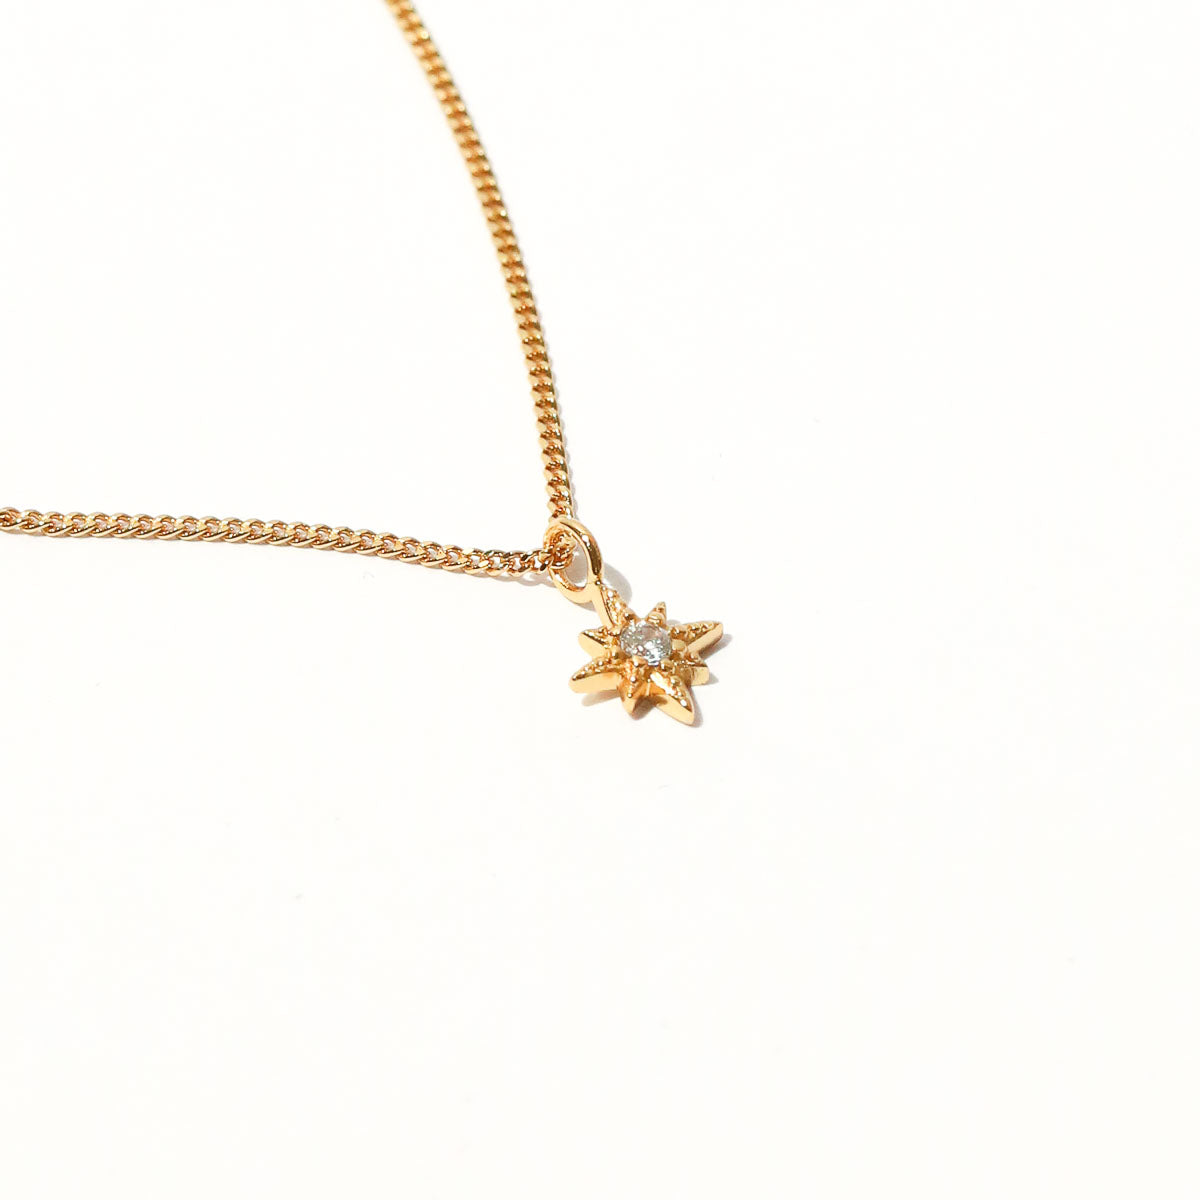 Twilight Star Pendant Necklace in Gold close up